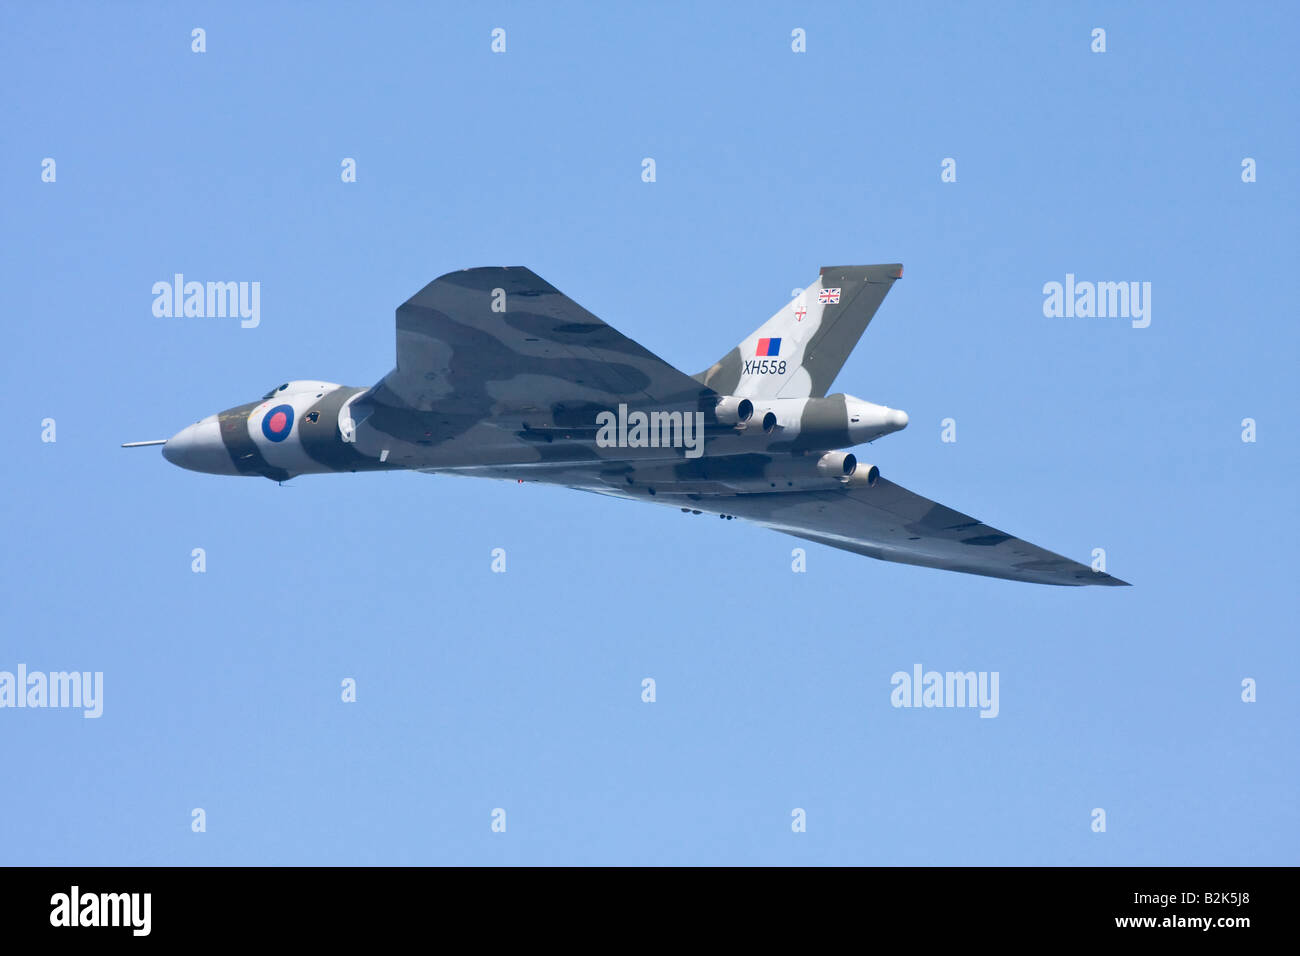 The restored Avro Hawker Siddeley Bae systems Vulcan B2 bomber of the RAF Stock Photo